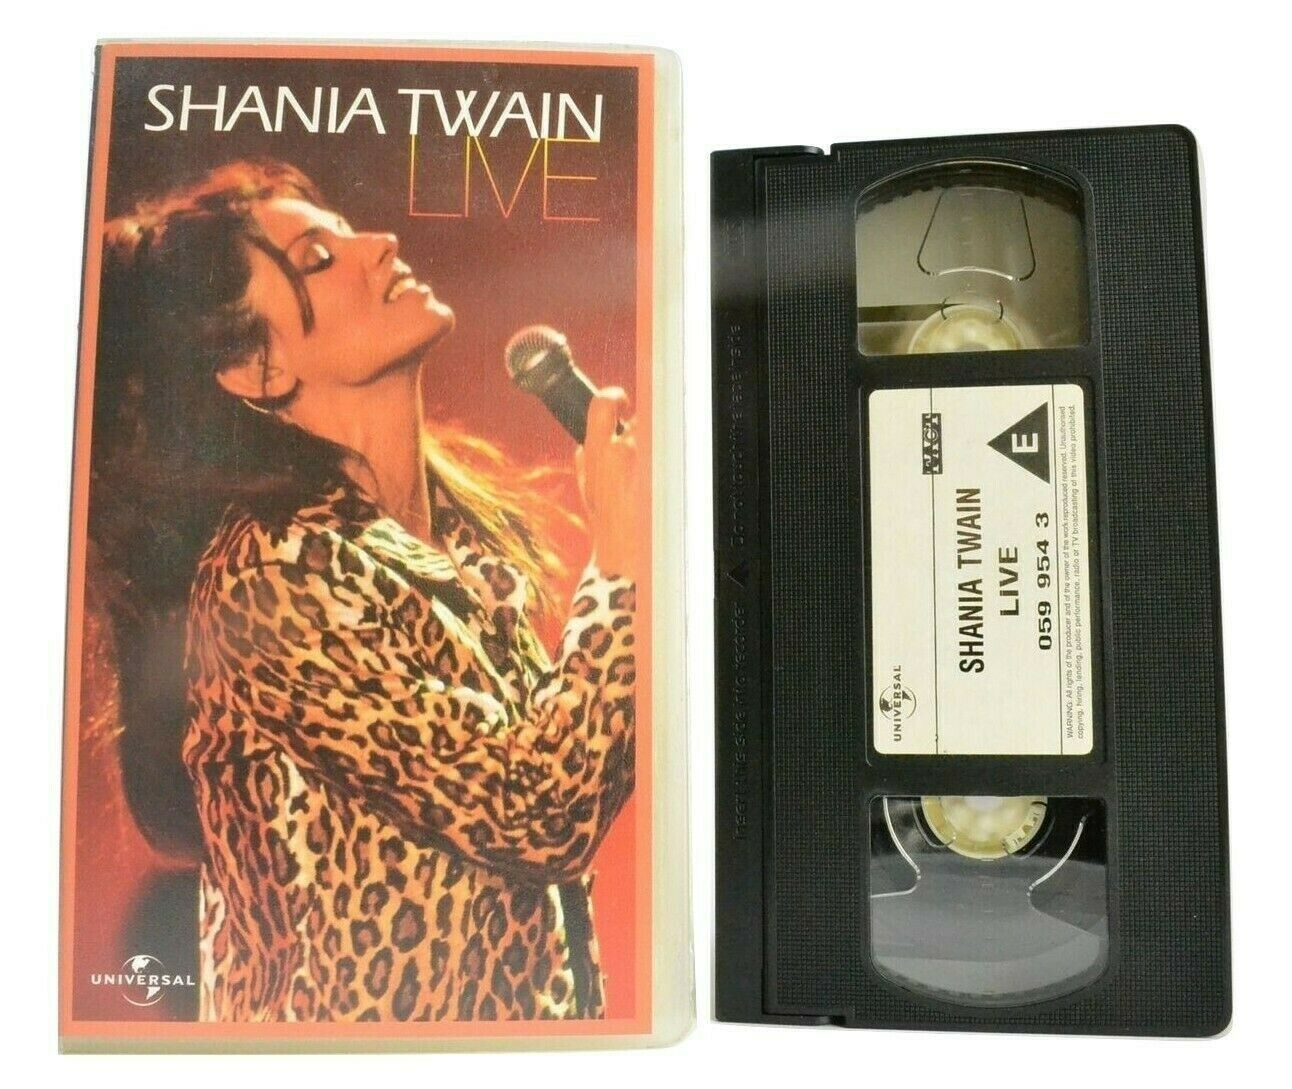 Shania Twain: Live - Concert [Dallas Reunion Arena] 'Come On Over' - Music - VHS-